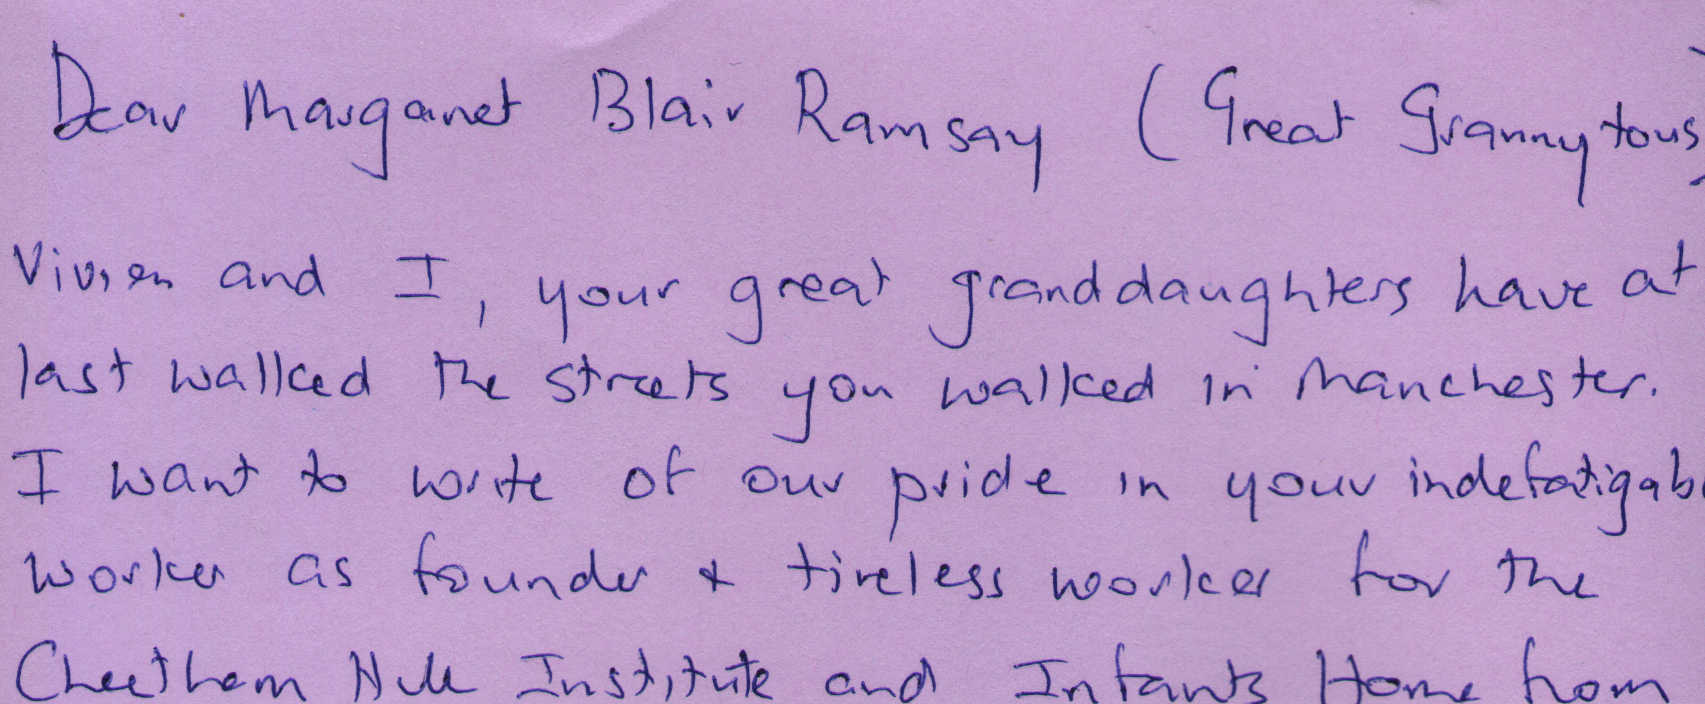 Letter to Margaret Blair Ramsay from Frances White